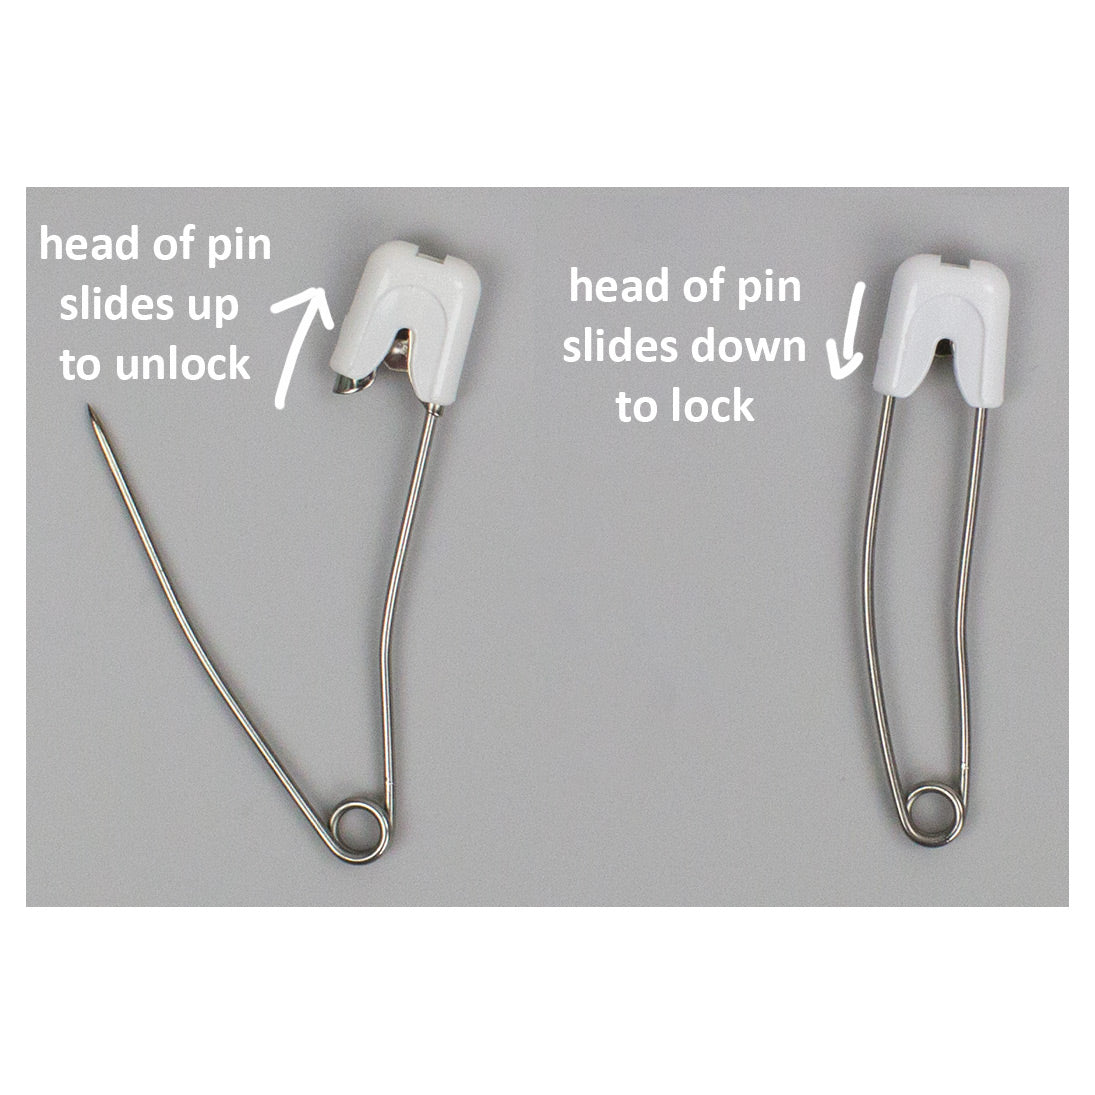 nappy diaper pin instructions